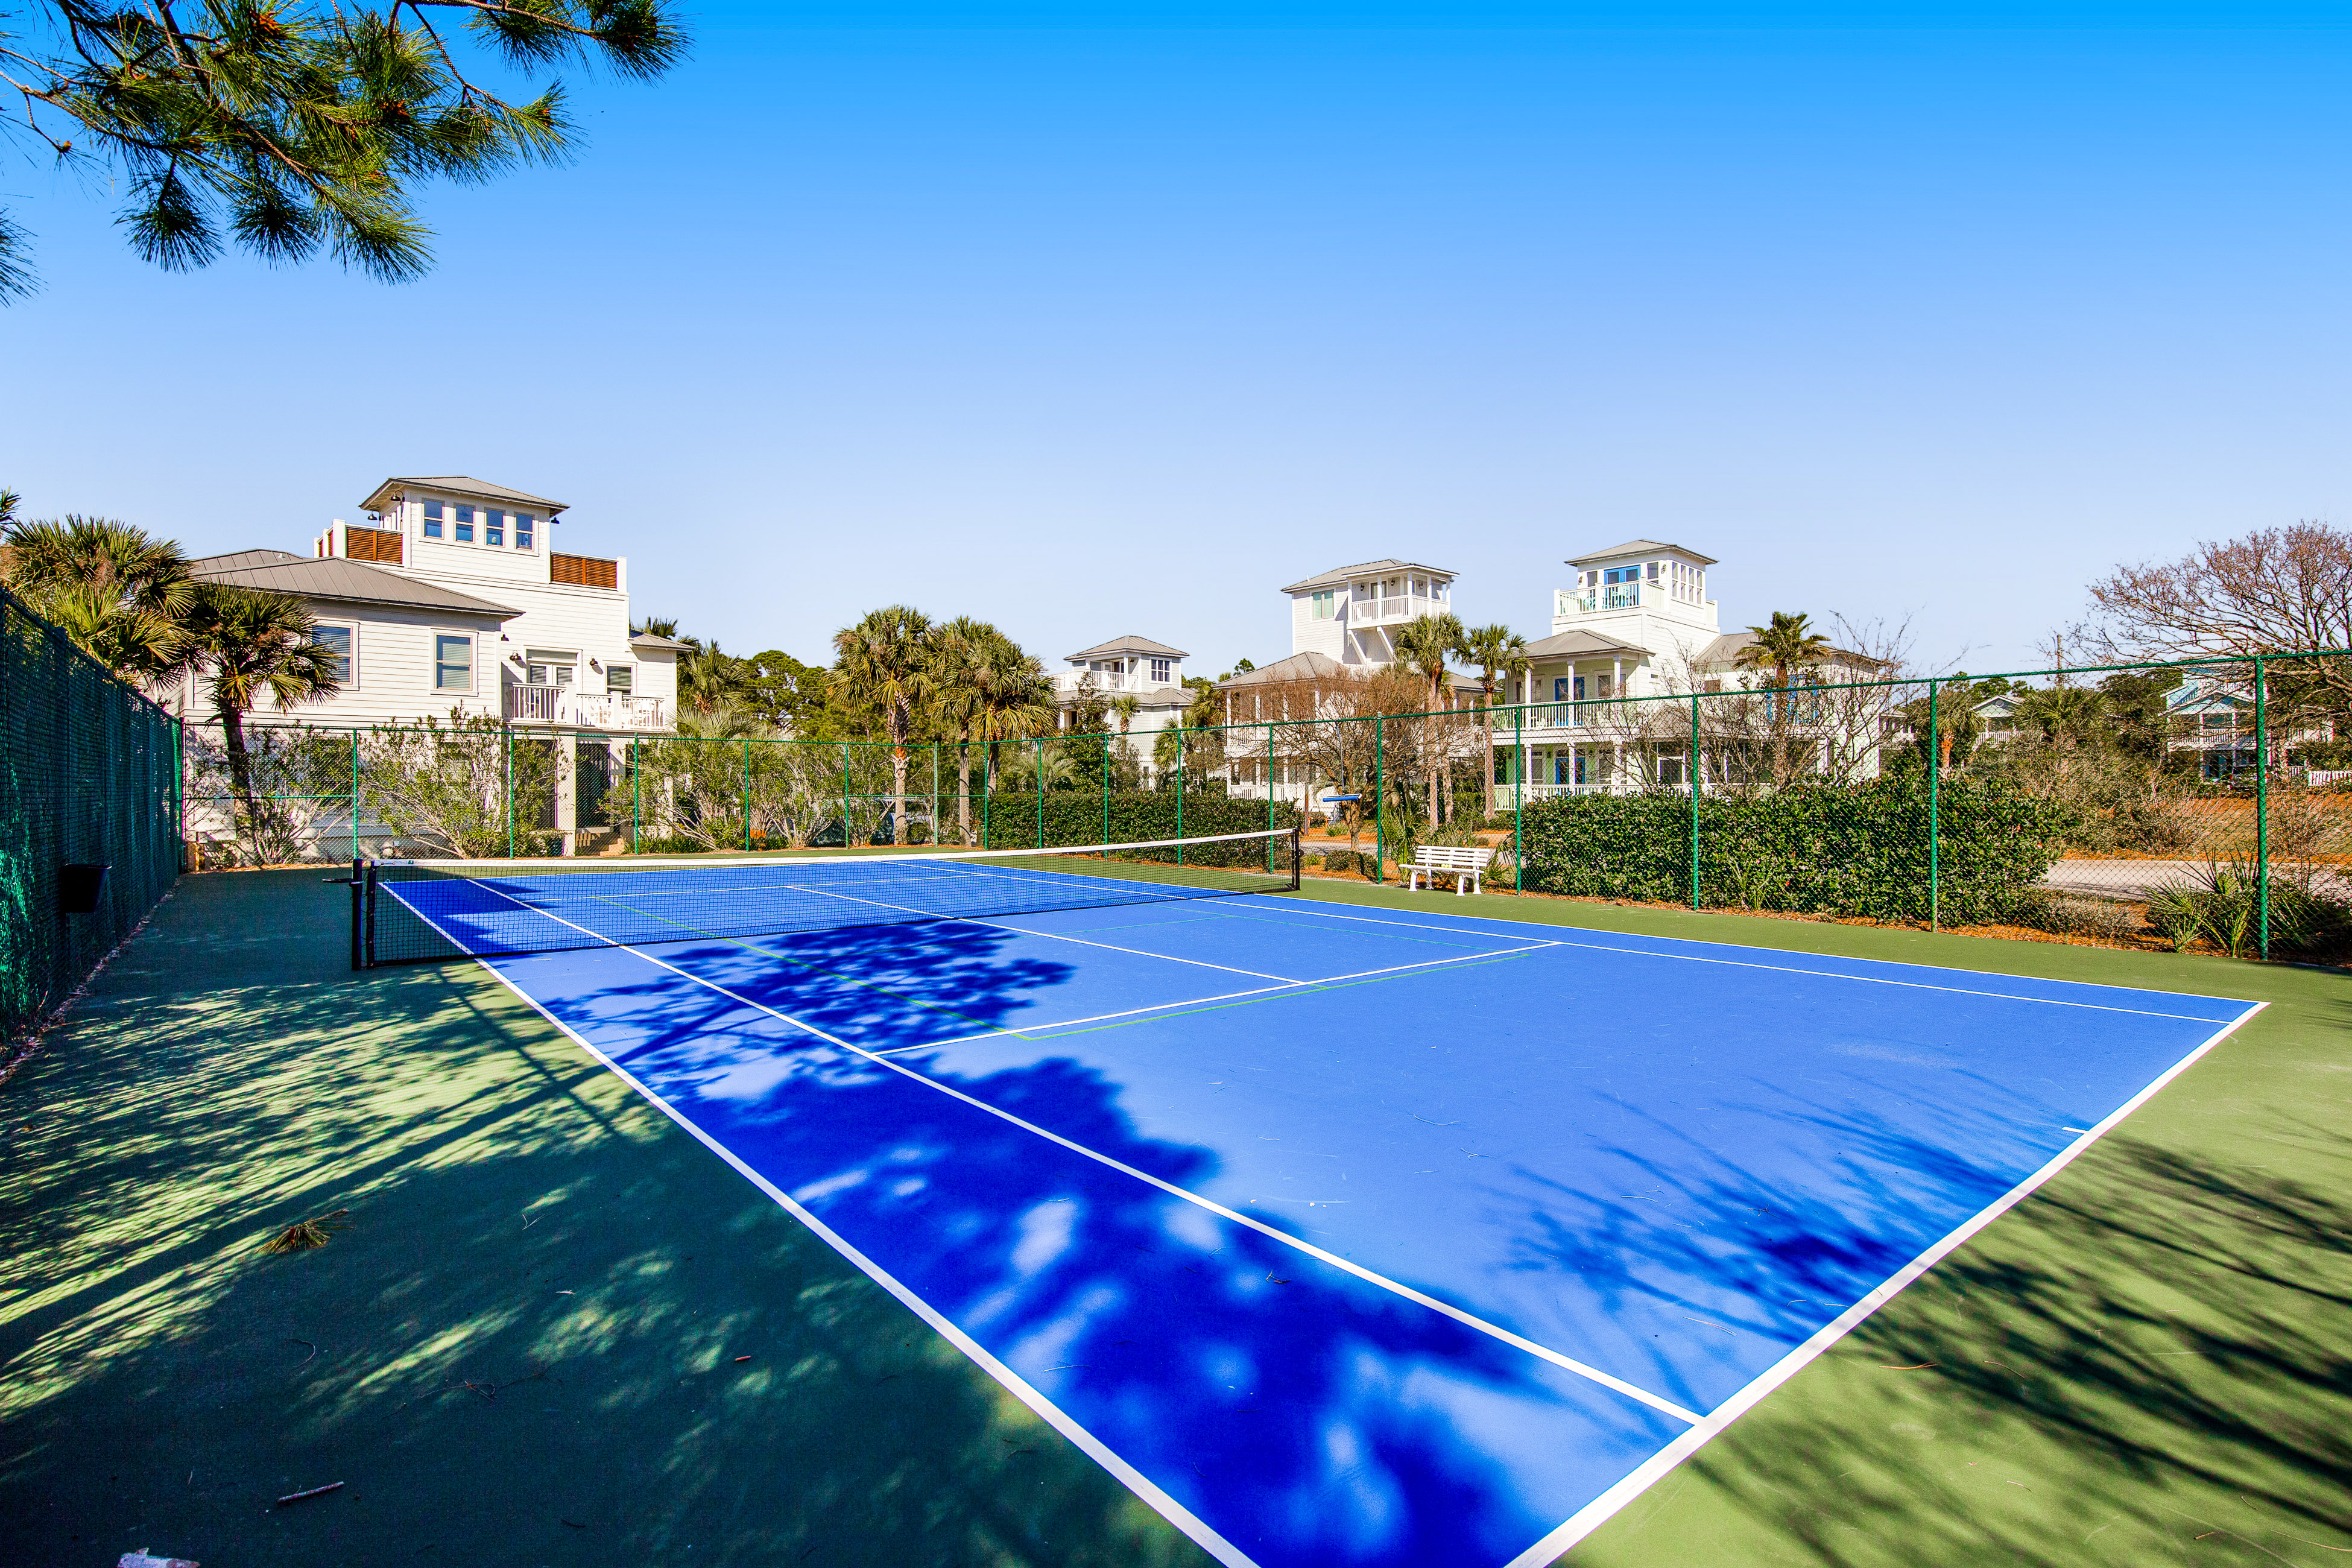 Dunes of Seagrove B202 Condo rental in Dunes of Seagrove in Highway 30-A Florida - #21